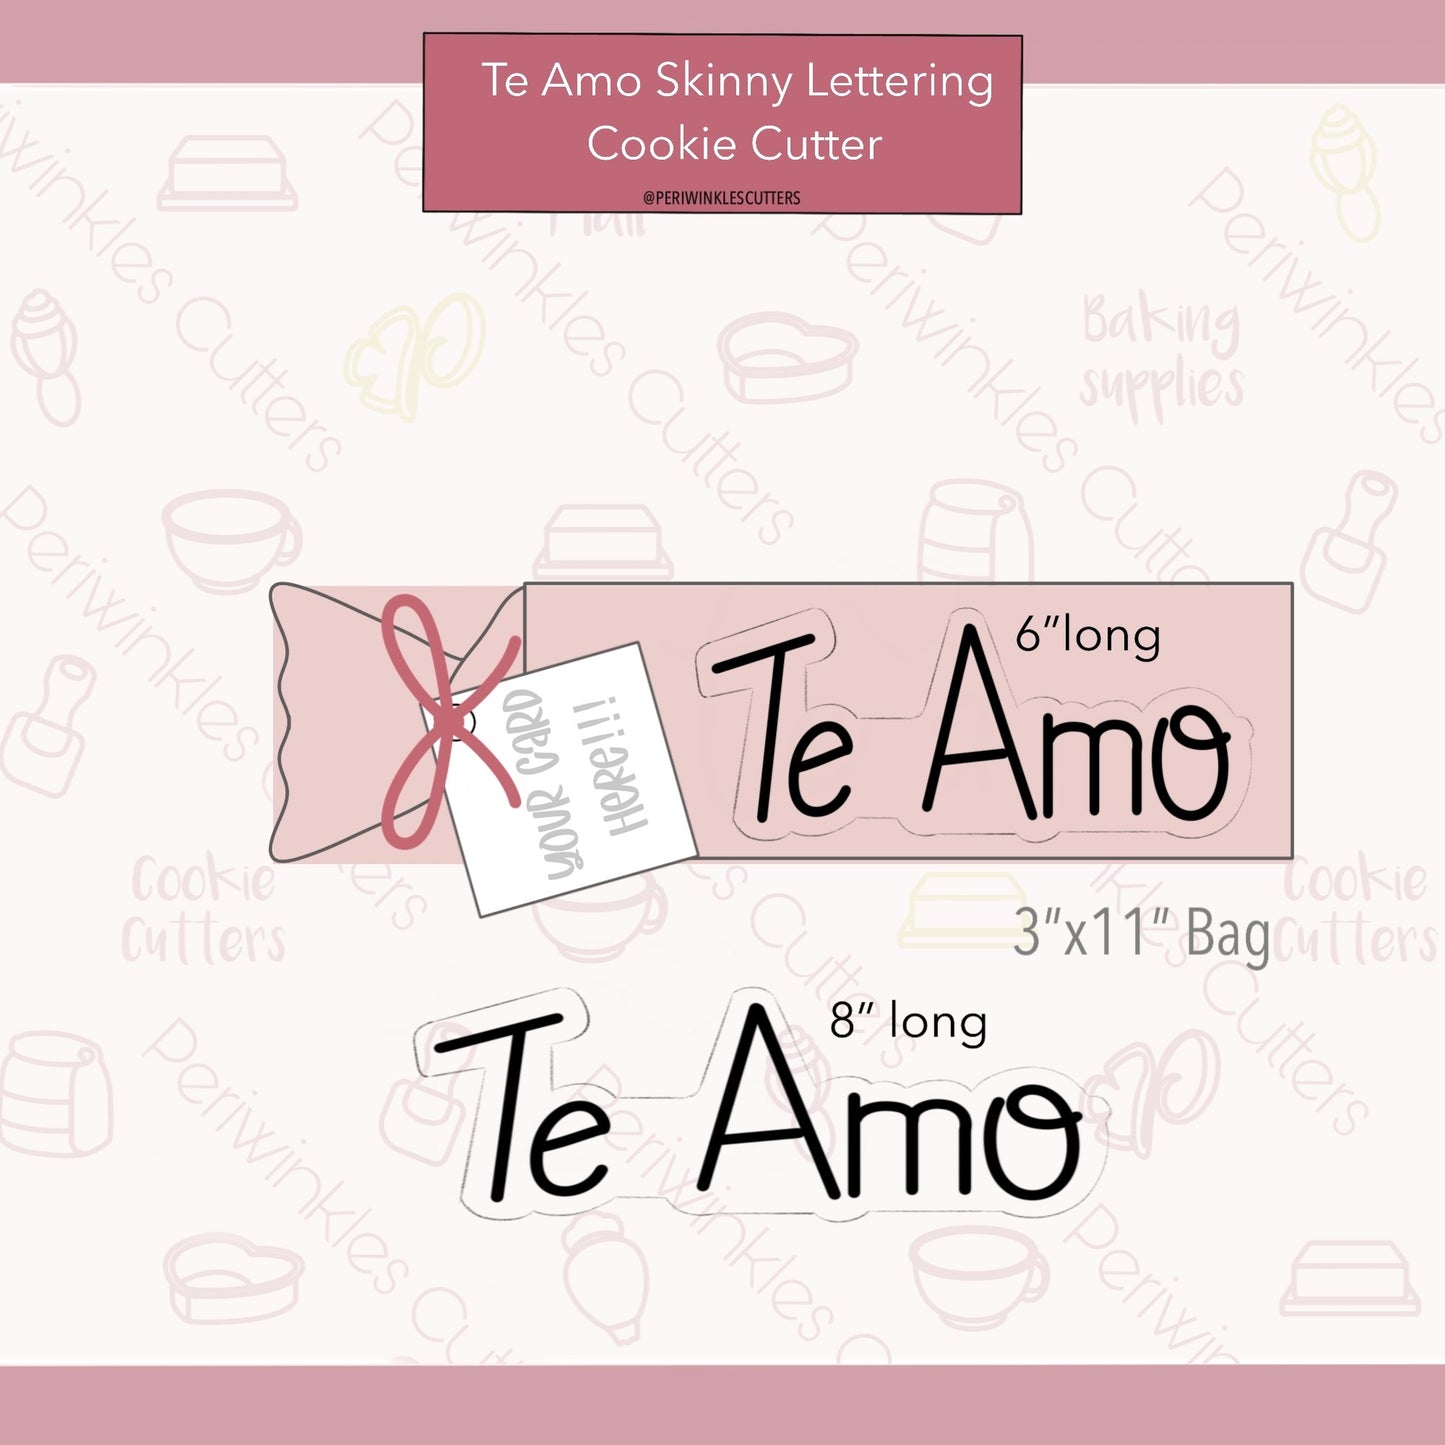 Te Amo Skinny Lettering Cookie Cutter - Periwinkles Cutters